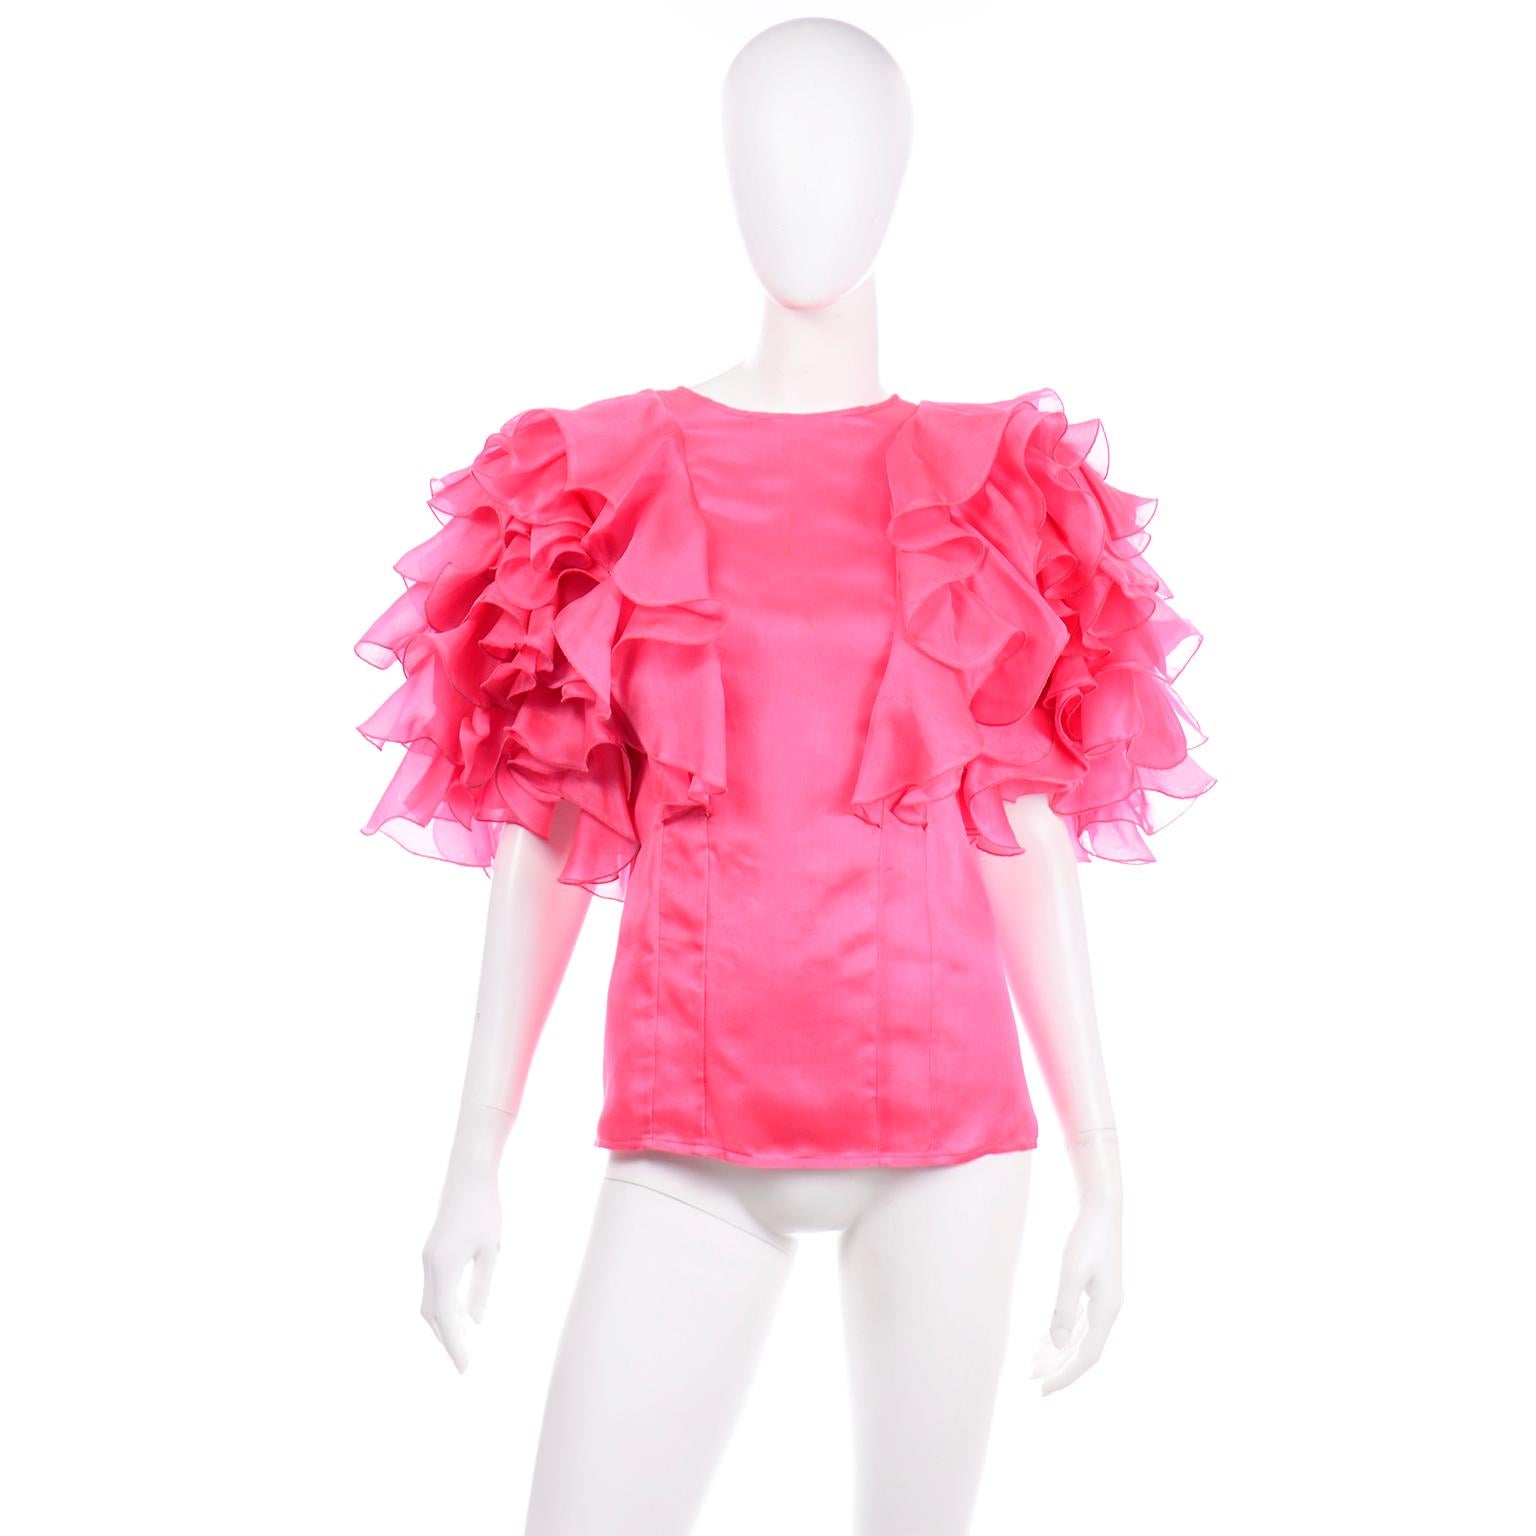 This incredible vintage coral pink silk organza Oscar de la Renta short sleeve ruffled blouse would be so perfect to pair with an evening skirt or a pair of silk trousers. This 1980's statement blouse has layers of ruffles that extend all the way